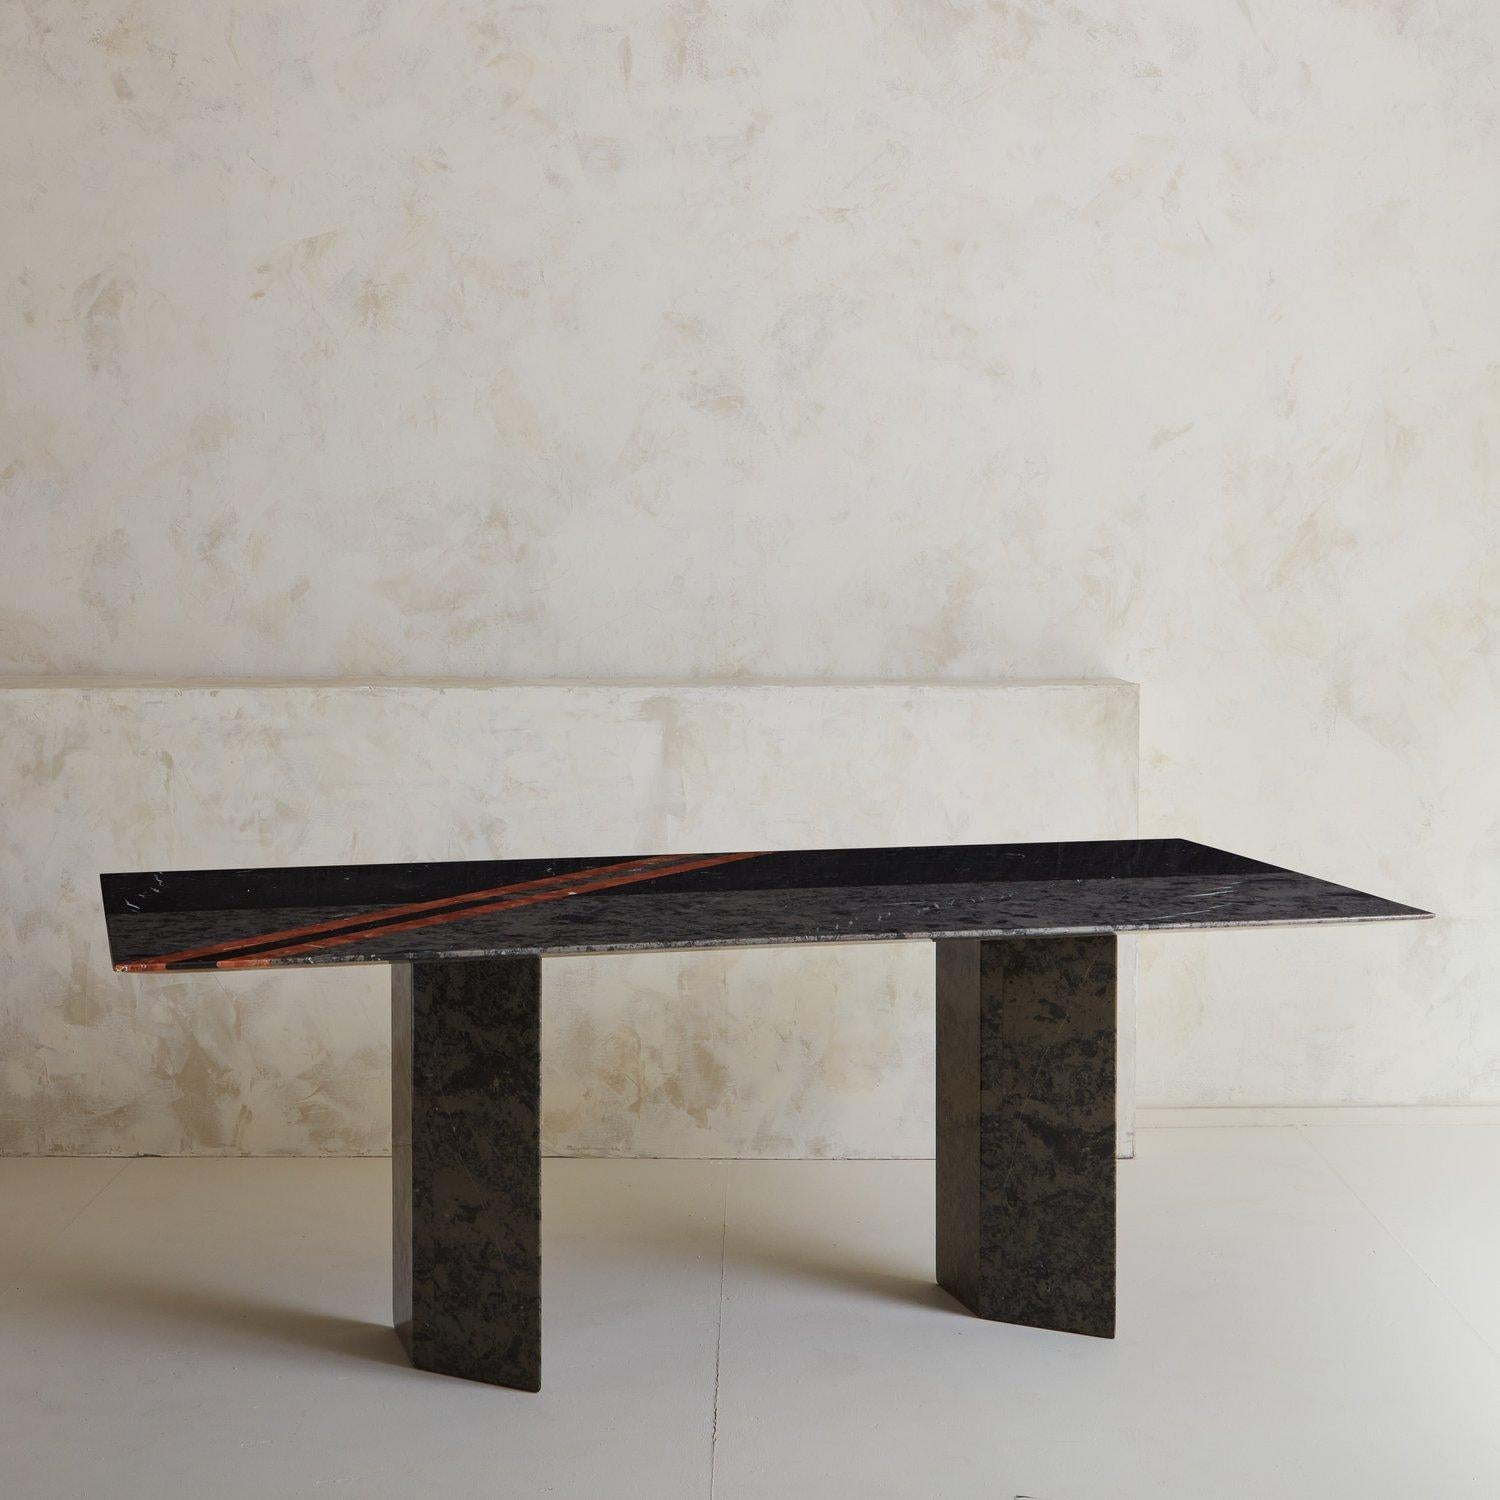 A 1980s Postmodern Roche-Bobois marble dining table constructed with Grigio Marquina and Rosso Albania marble with a beautiful linear design. The tabletop has an elegant sharknose beveled edge, offering the support of a thicker stone while